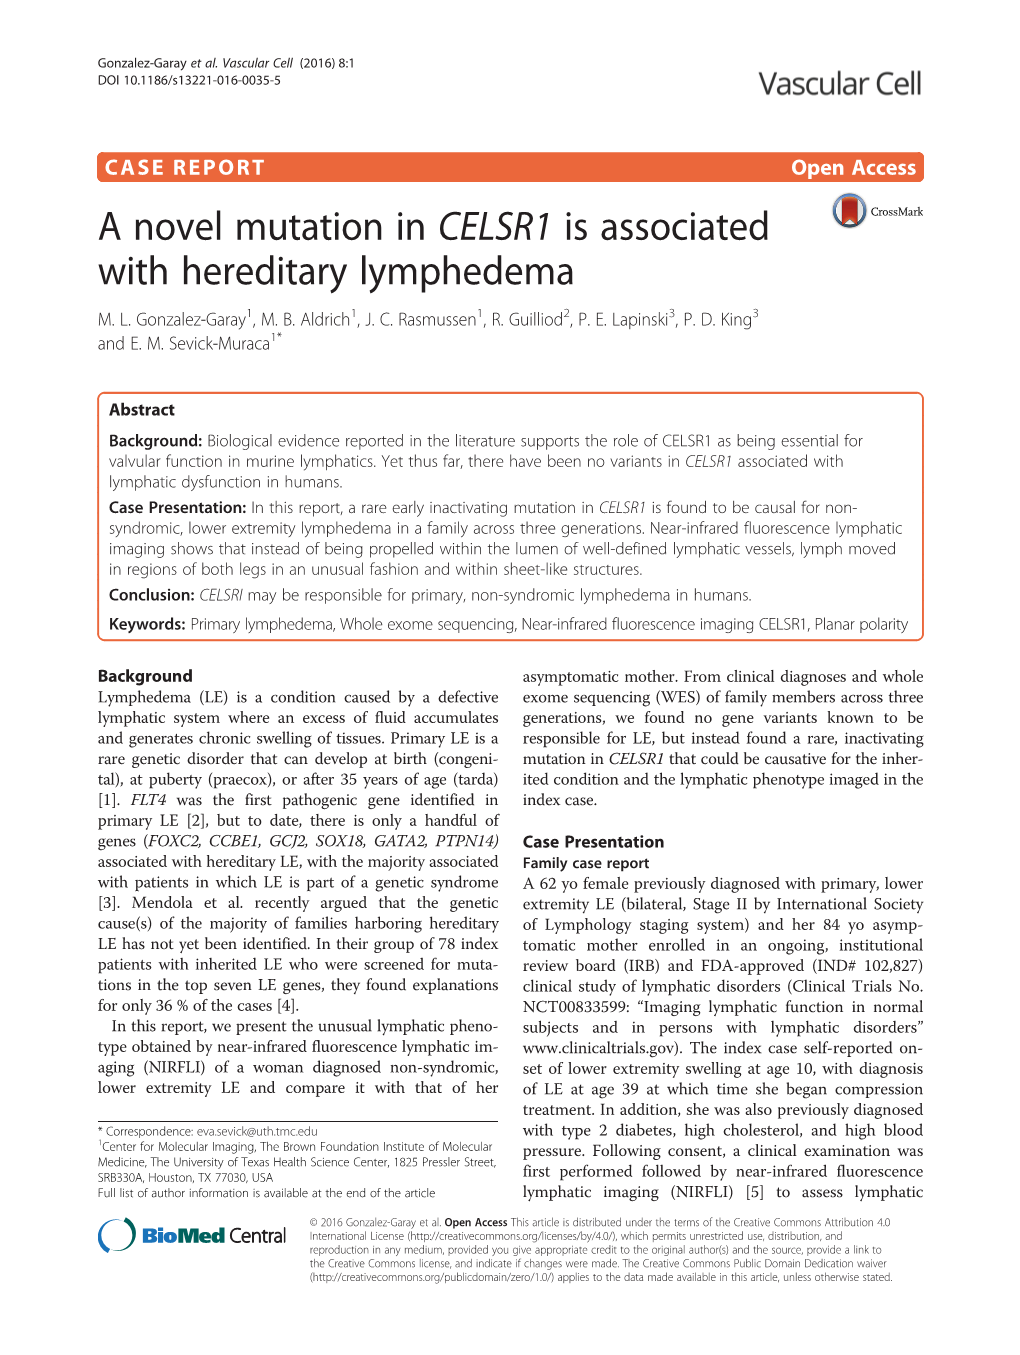 A Novel Mutation in CELSR1 Is Associated with Hereditary Lymphedema M